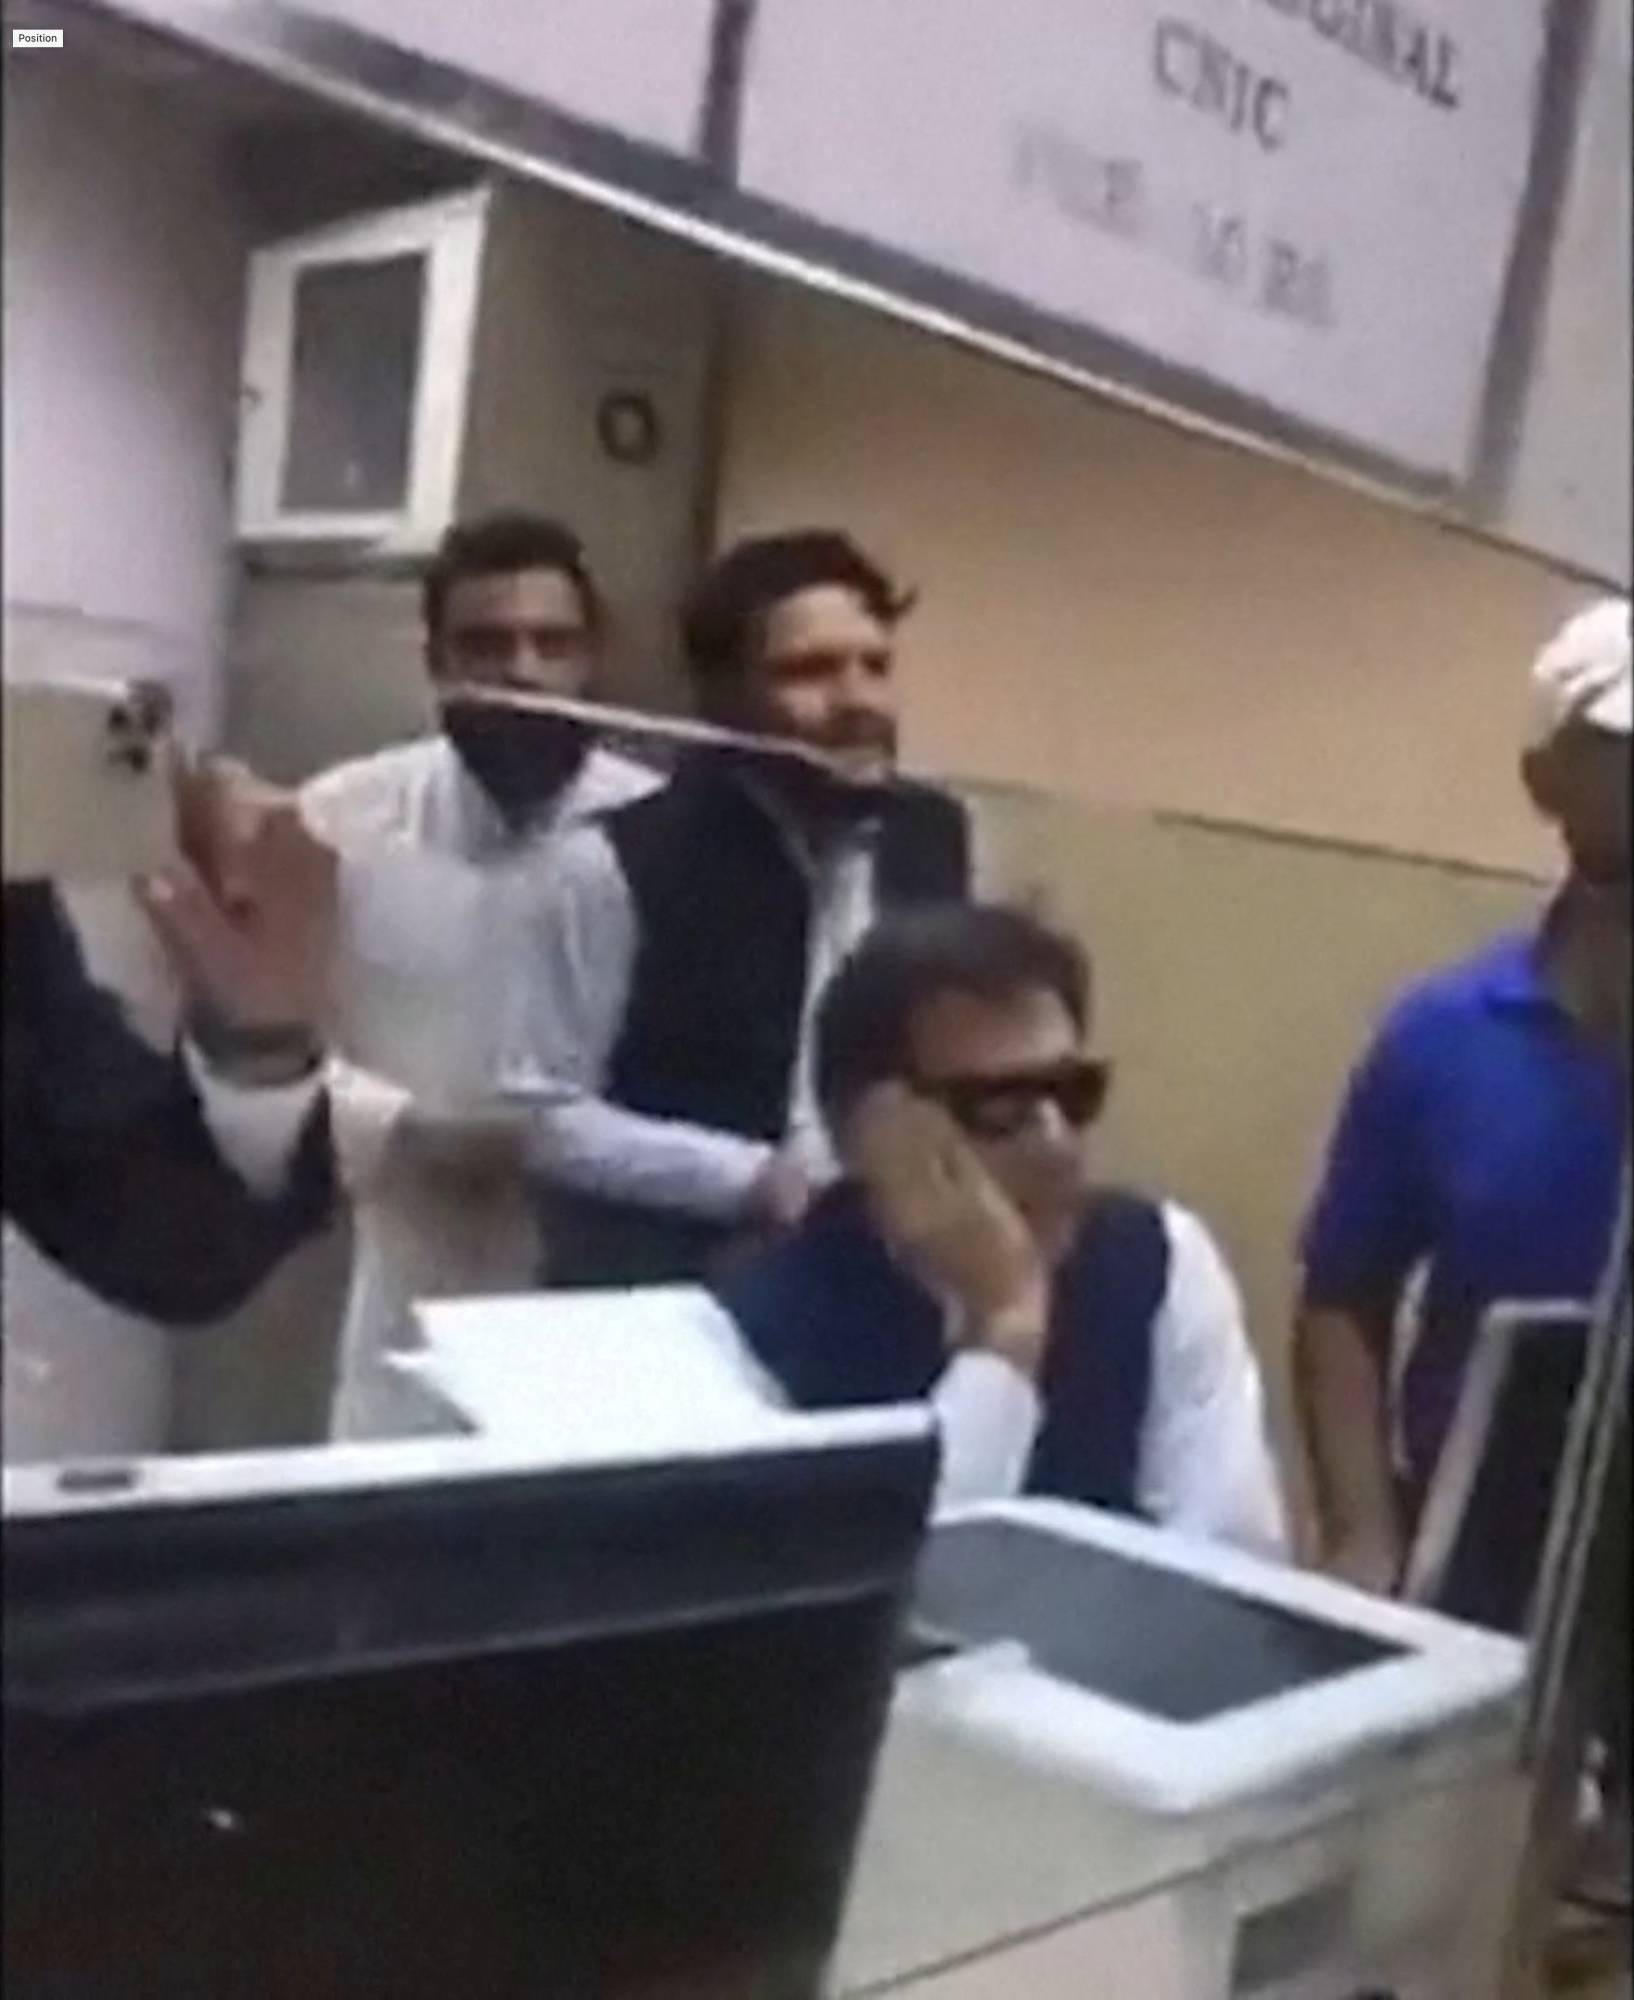 Khan seated in court as security enters to arrest him in Islamabad on Tuesday | PAKISTAN TEHREEK-E-INSAF / VIA REUTERS 